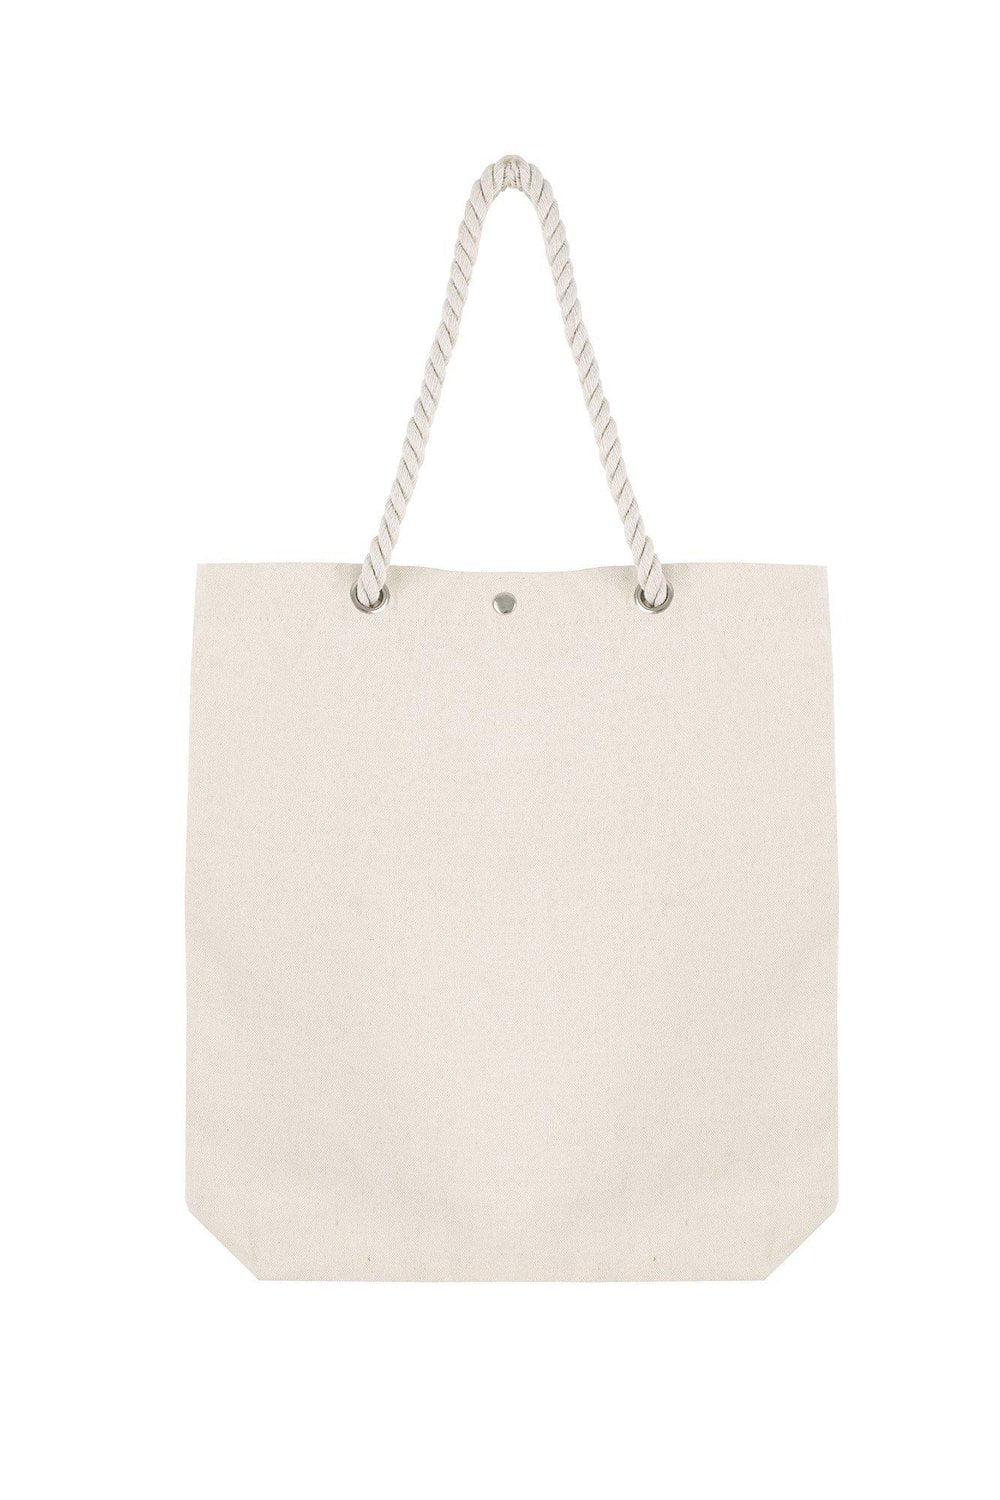 Premium Canvas Tote Bag with Rope Handles and Metal Button Closure